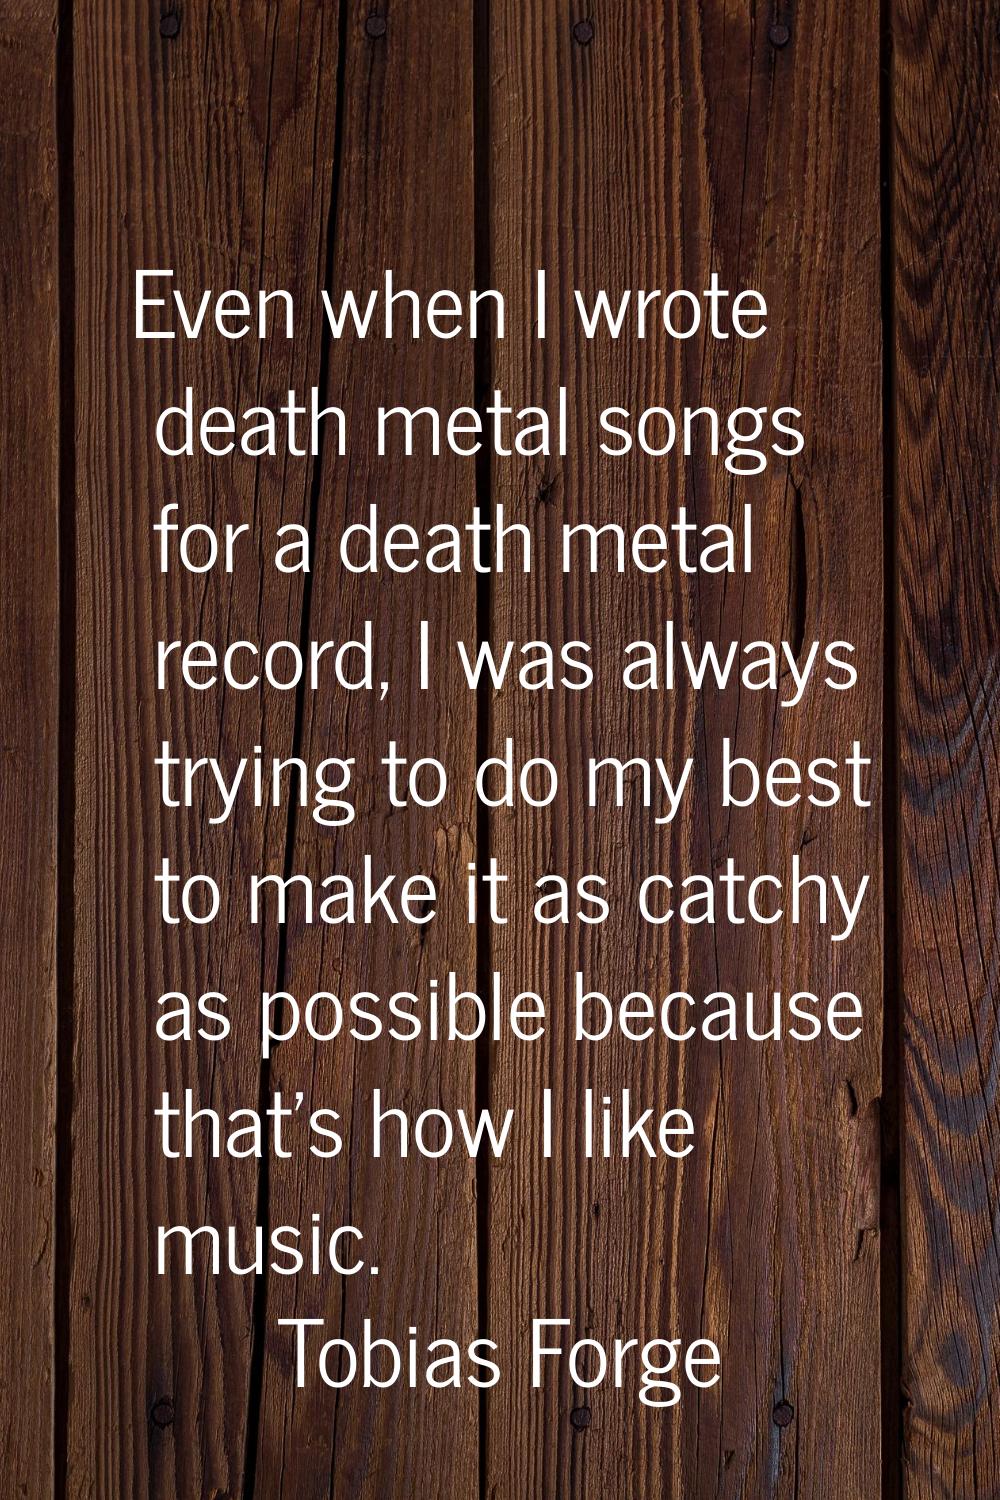 Even when I wrote death metal songs for a death metal record, I was always trying to do my best to 